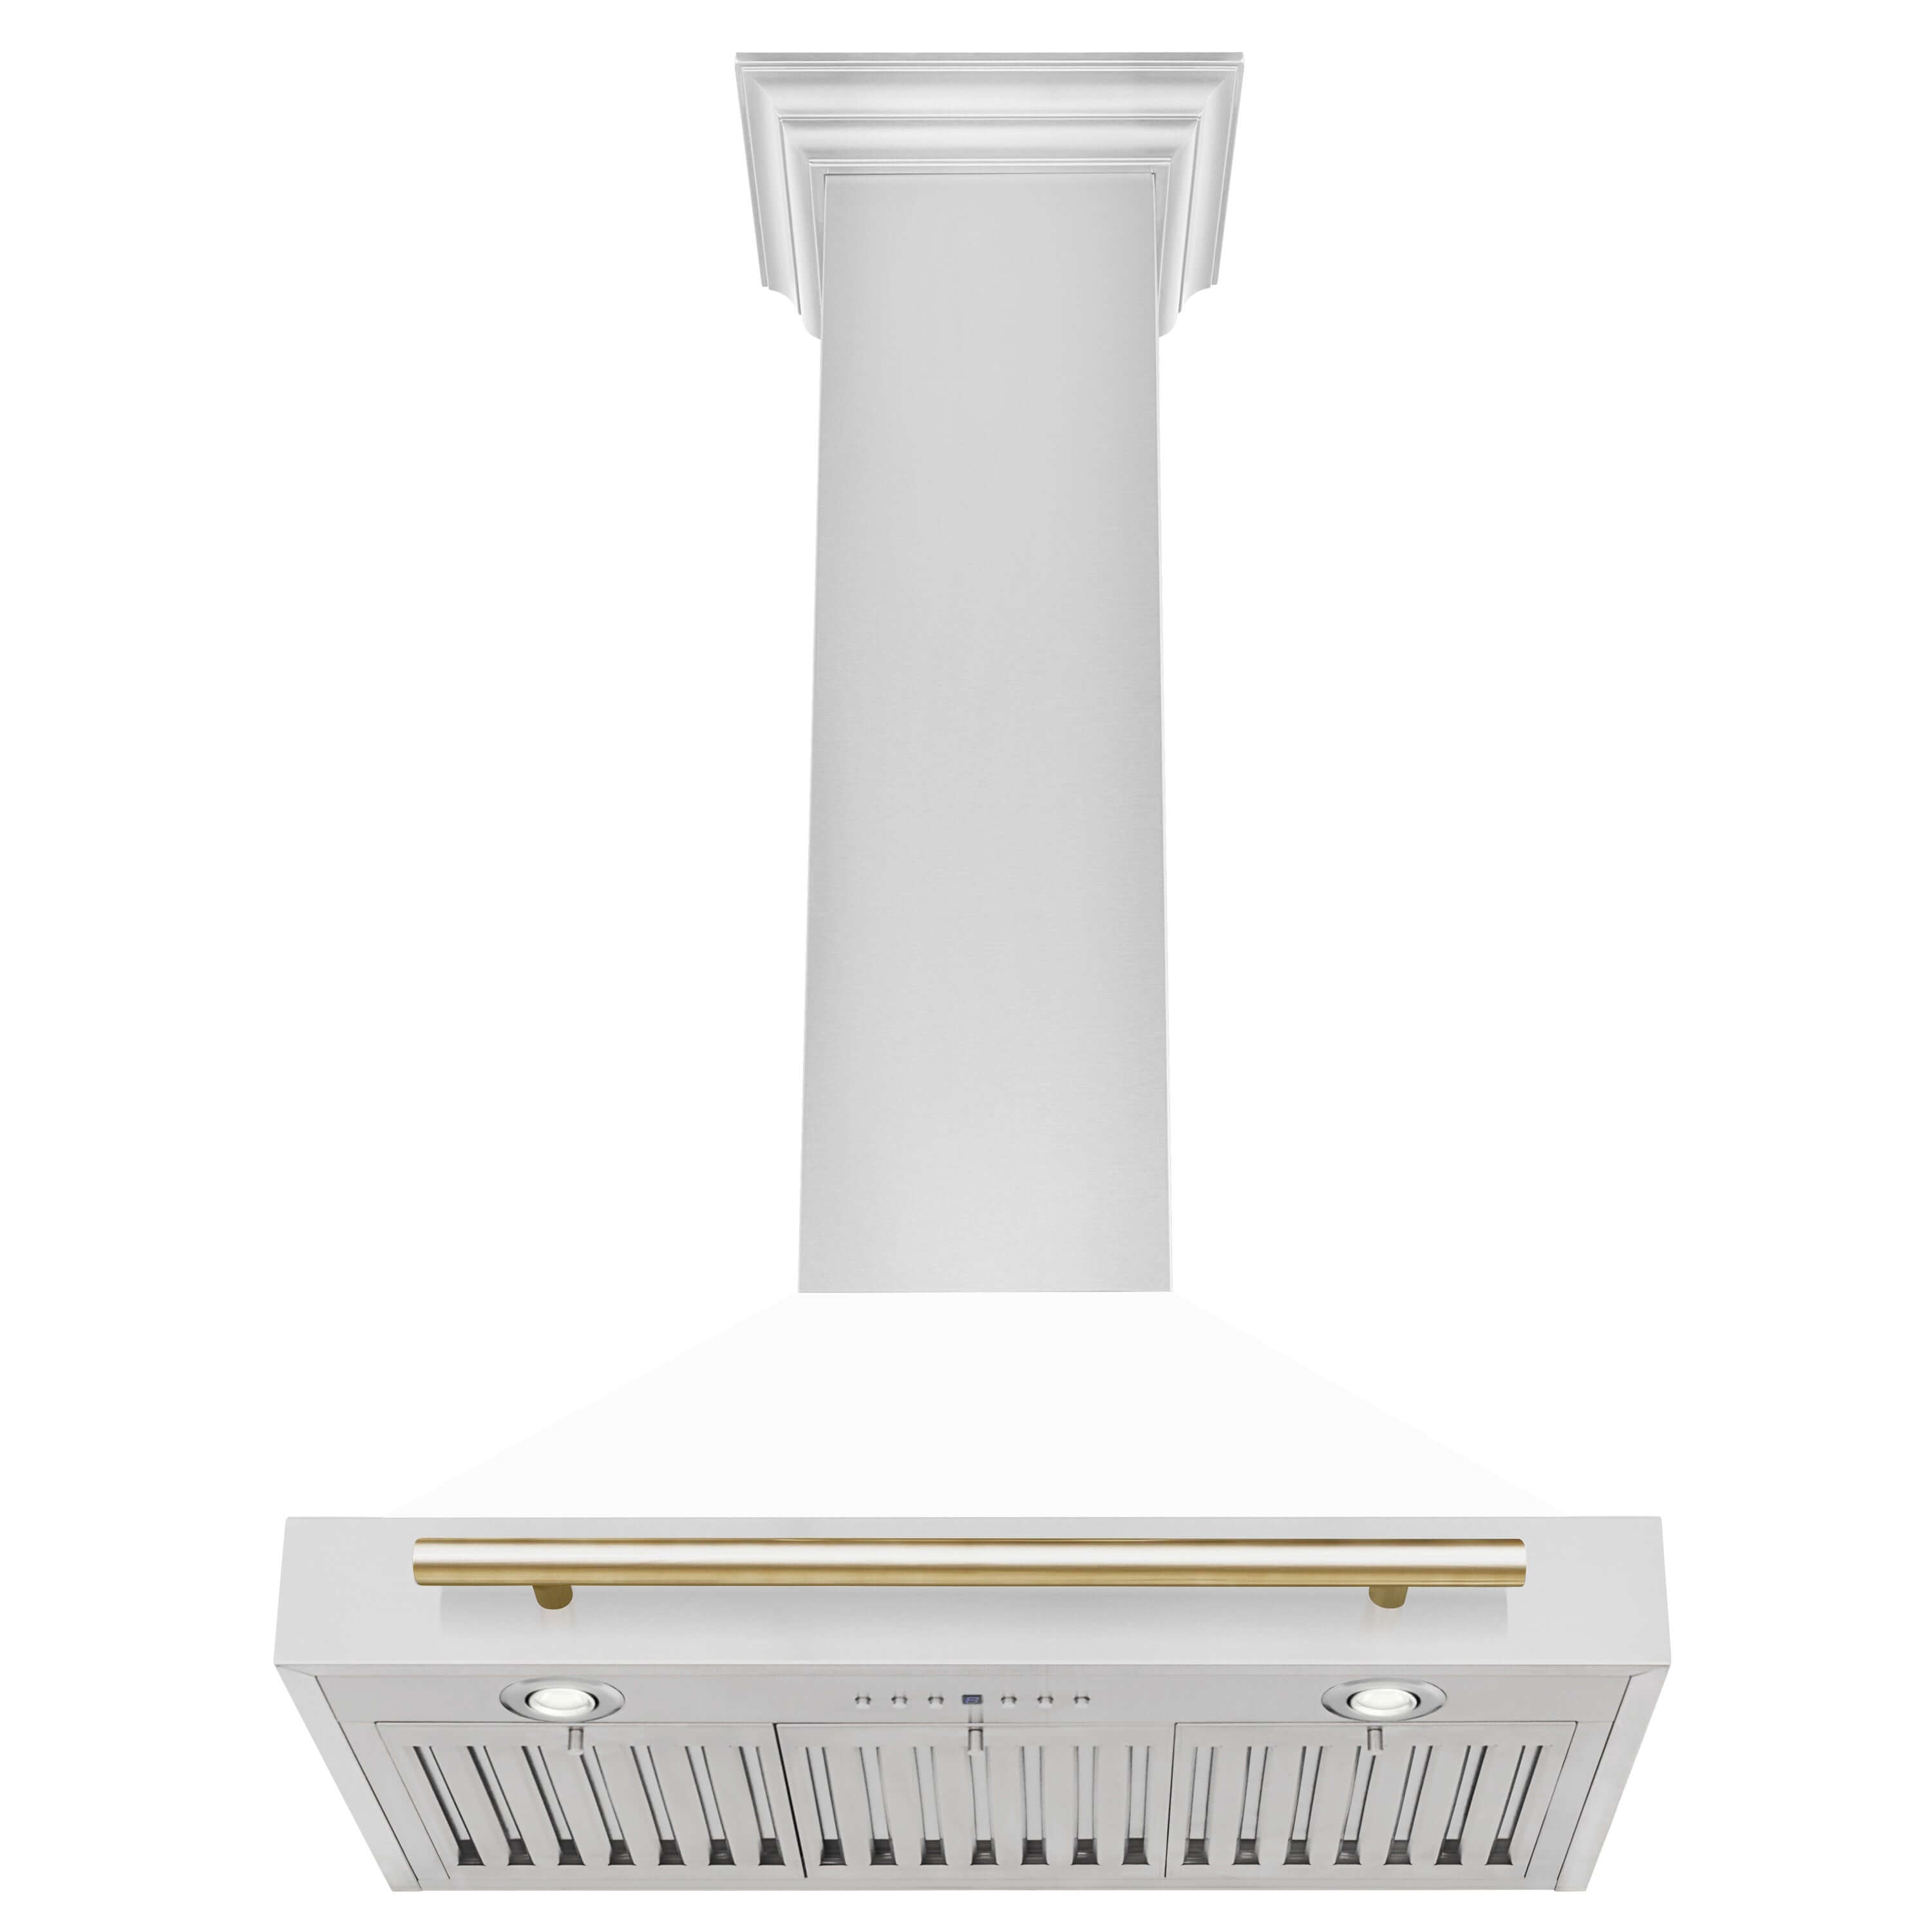 ZLINE 30 in. Autograph Edition Stainless Steel Range Hood with White Matte Shell with Gold Accents (KB4STZ-WM30) Under View